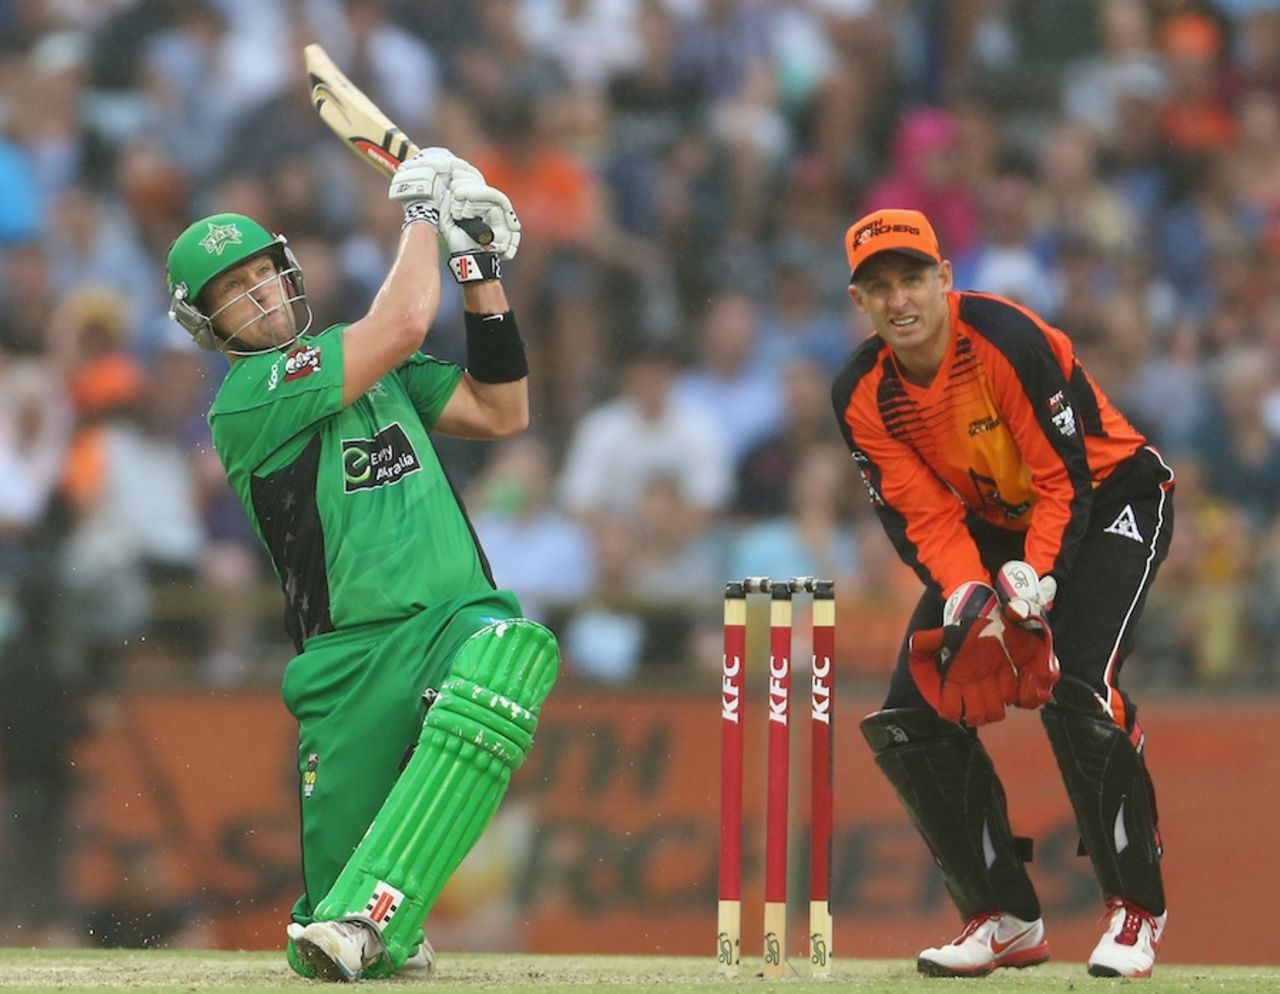 Cameron White slogs over the leg side as Michael Hussey keeps wicket, Perth Scorchers v Melbourne Stars, BBL semi-final, Perth, January 16, 2013